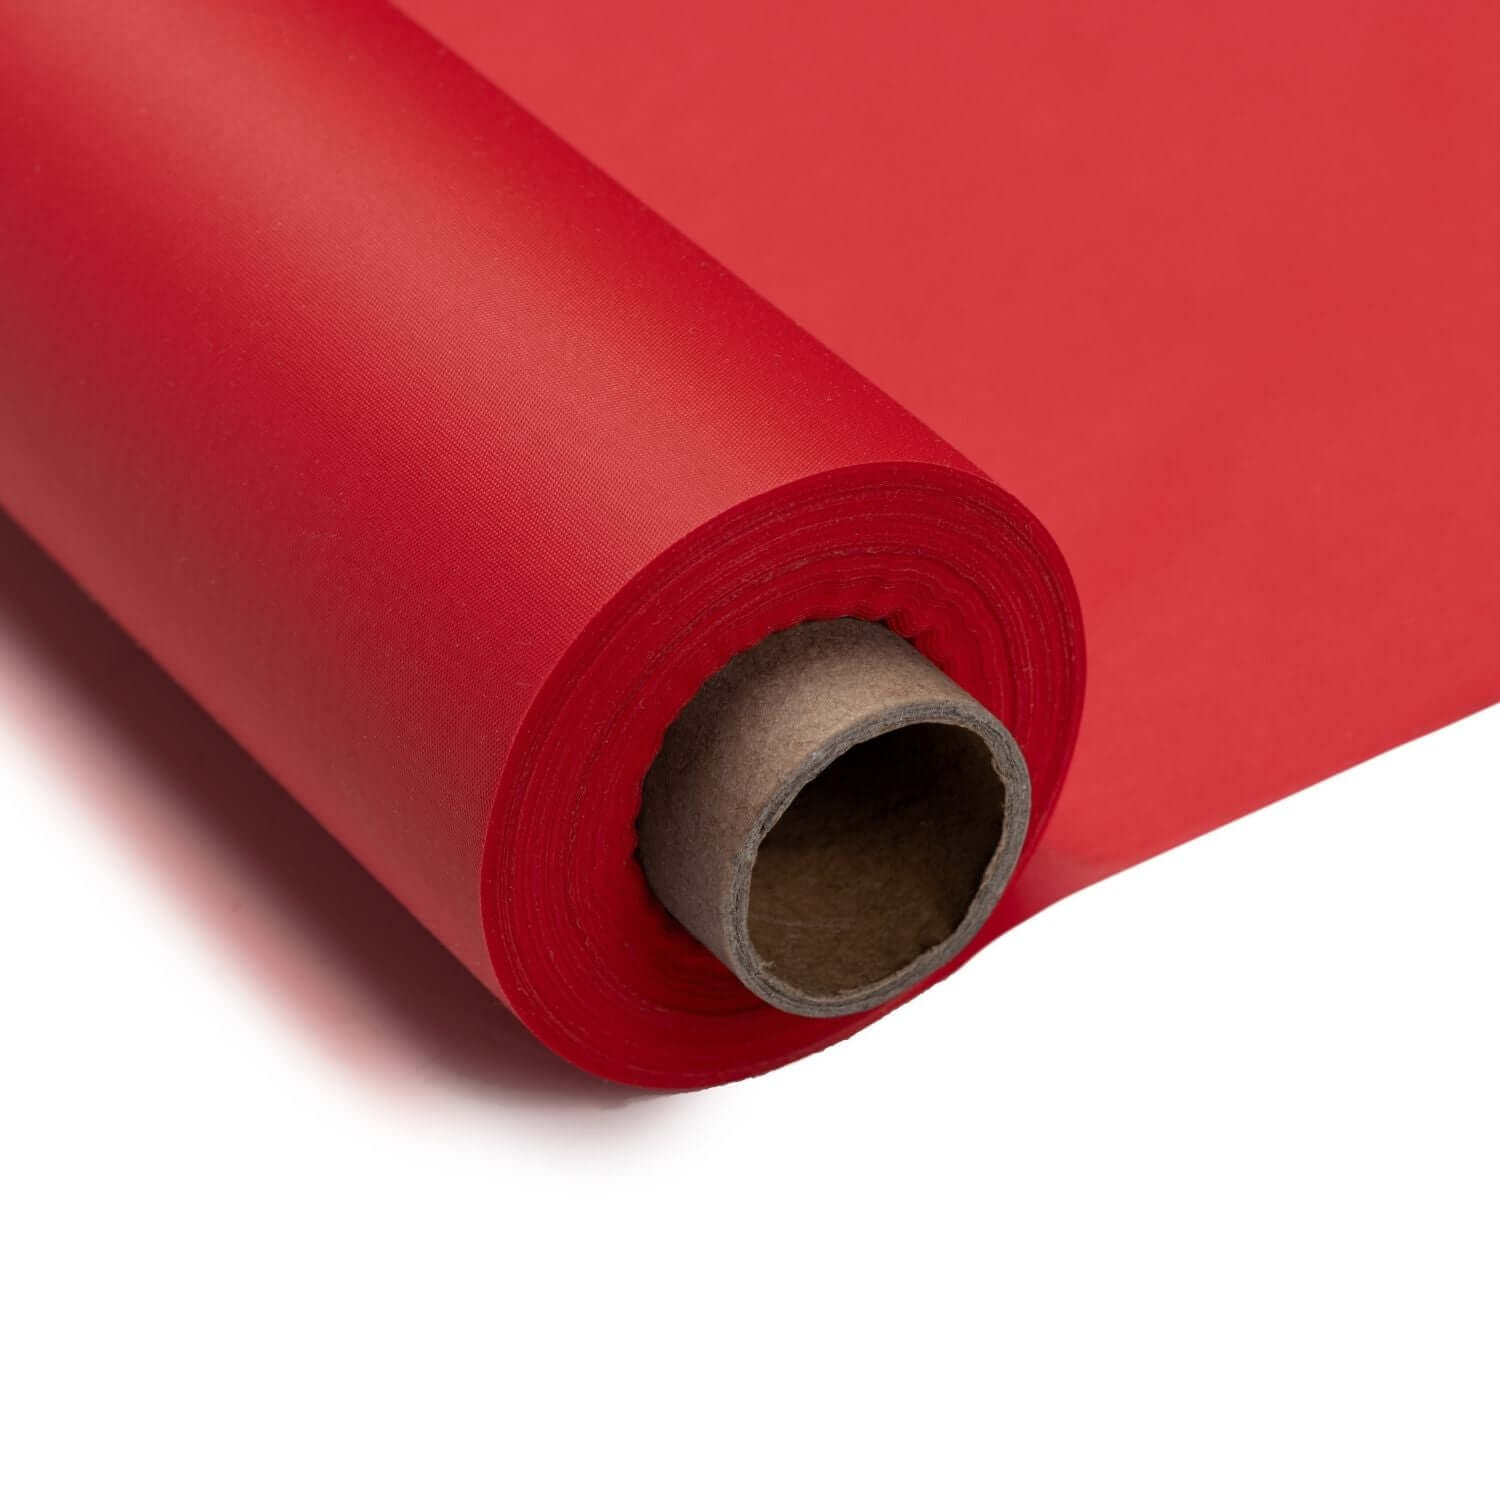 40 In. X 300 Ft. Premium Red Plastic Table Roll | 4 Pack - Yom Tov Settings